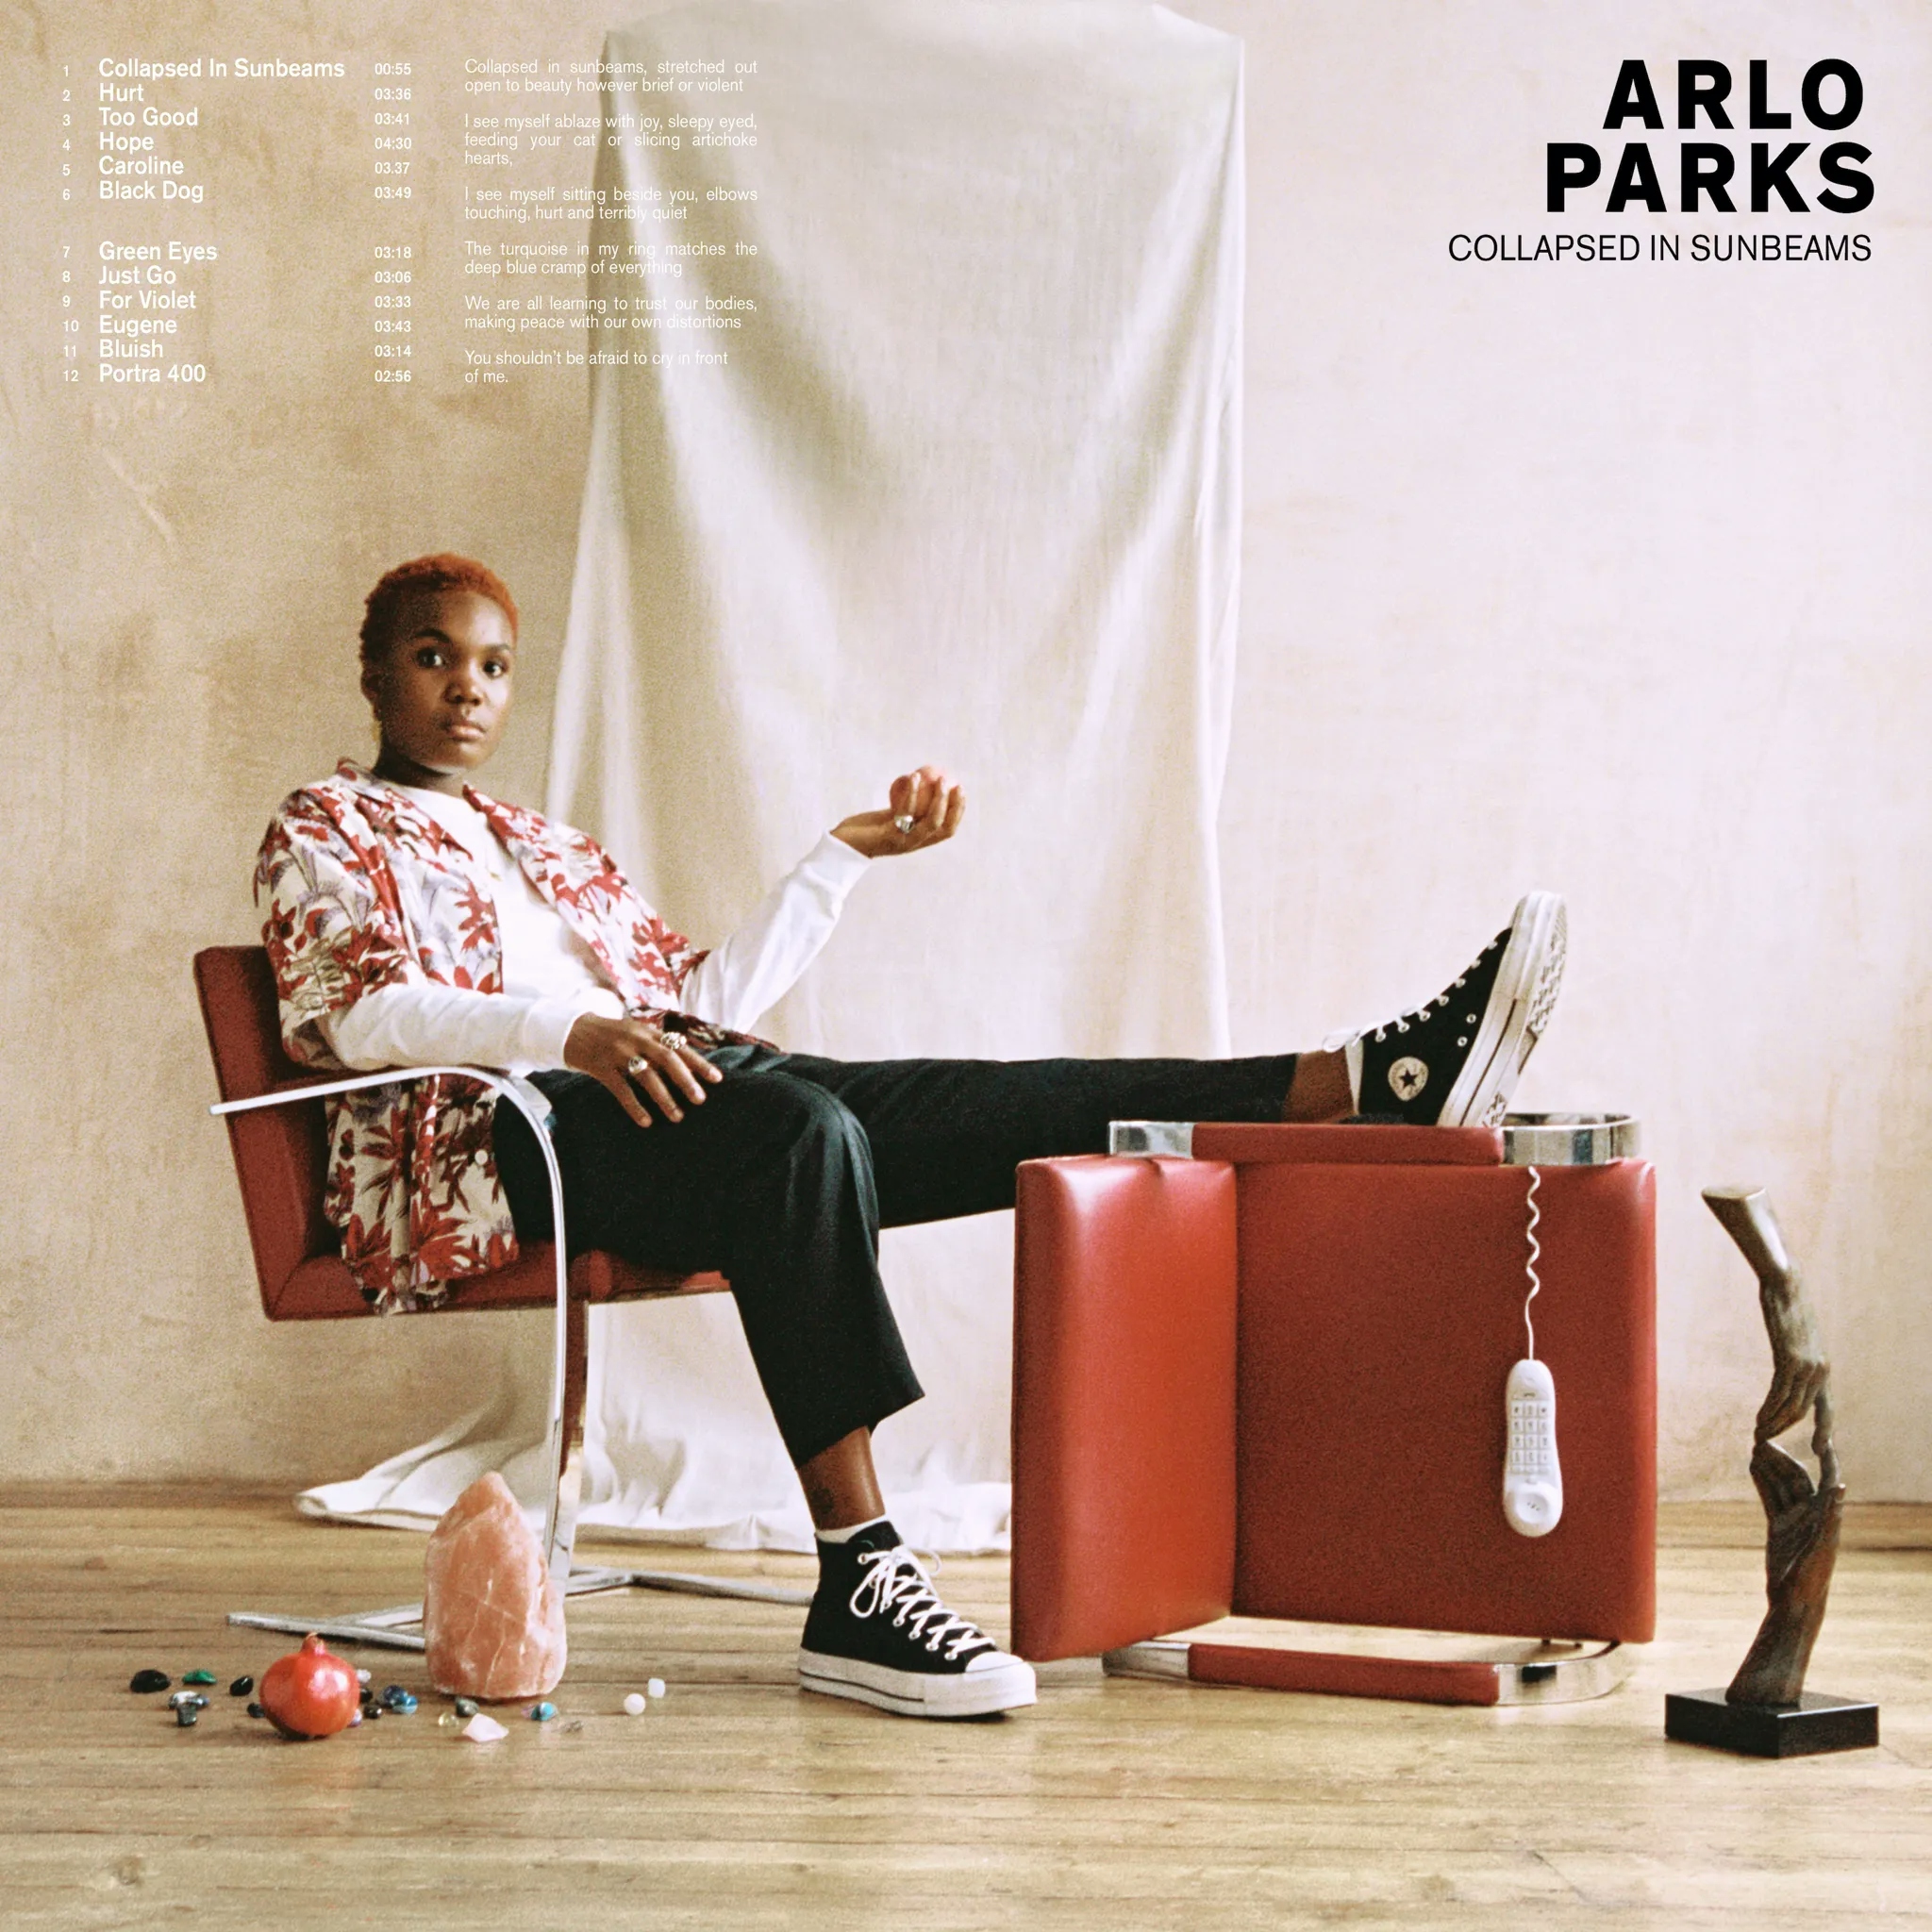 Album artwork for Collapsed In Sunbeams by Arlo Parks